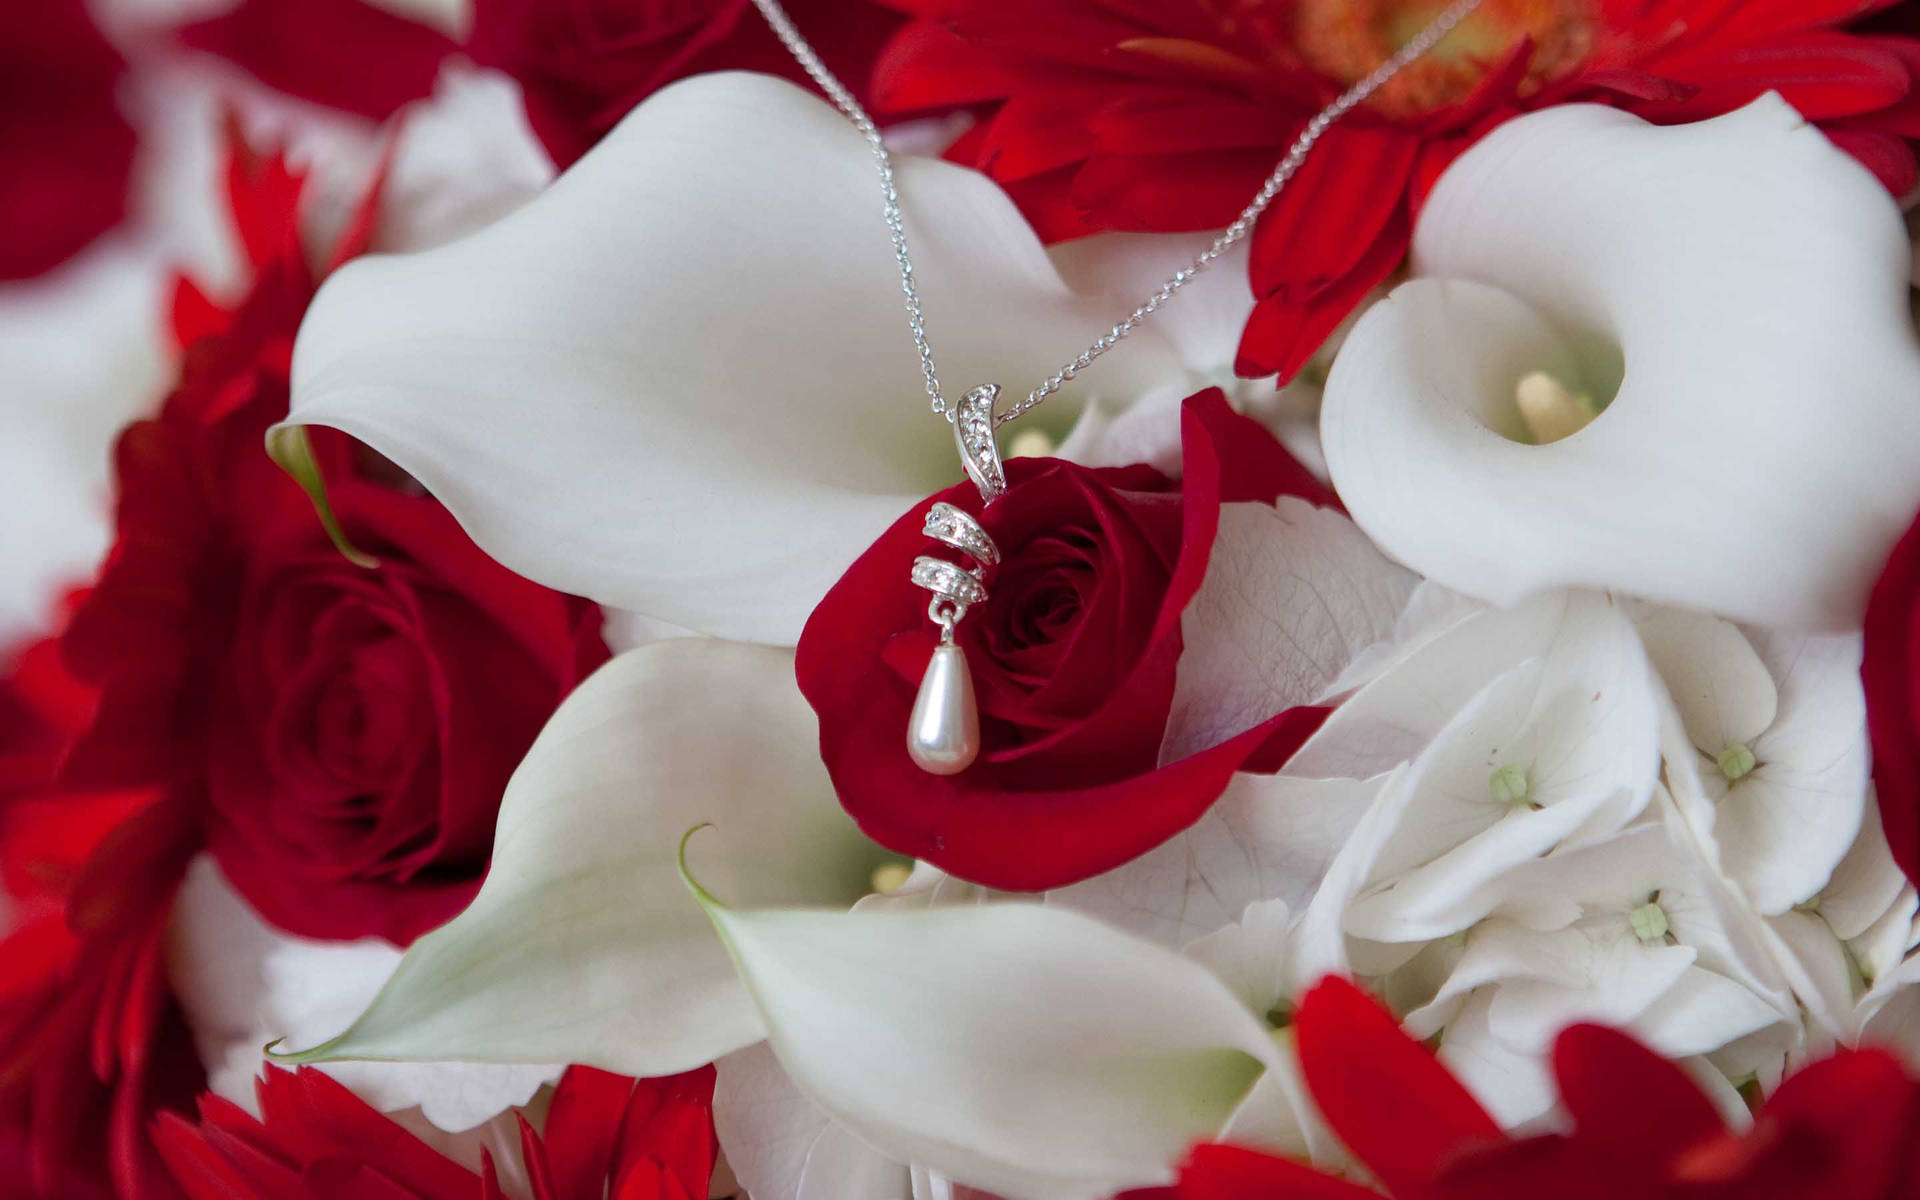 Enchanting Romance - A Rose and Heart Necklace Wallpaper